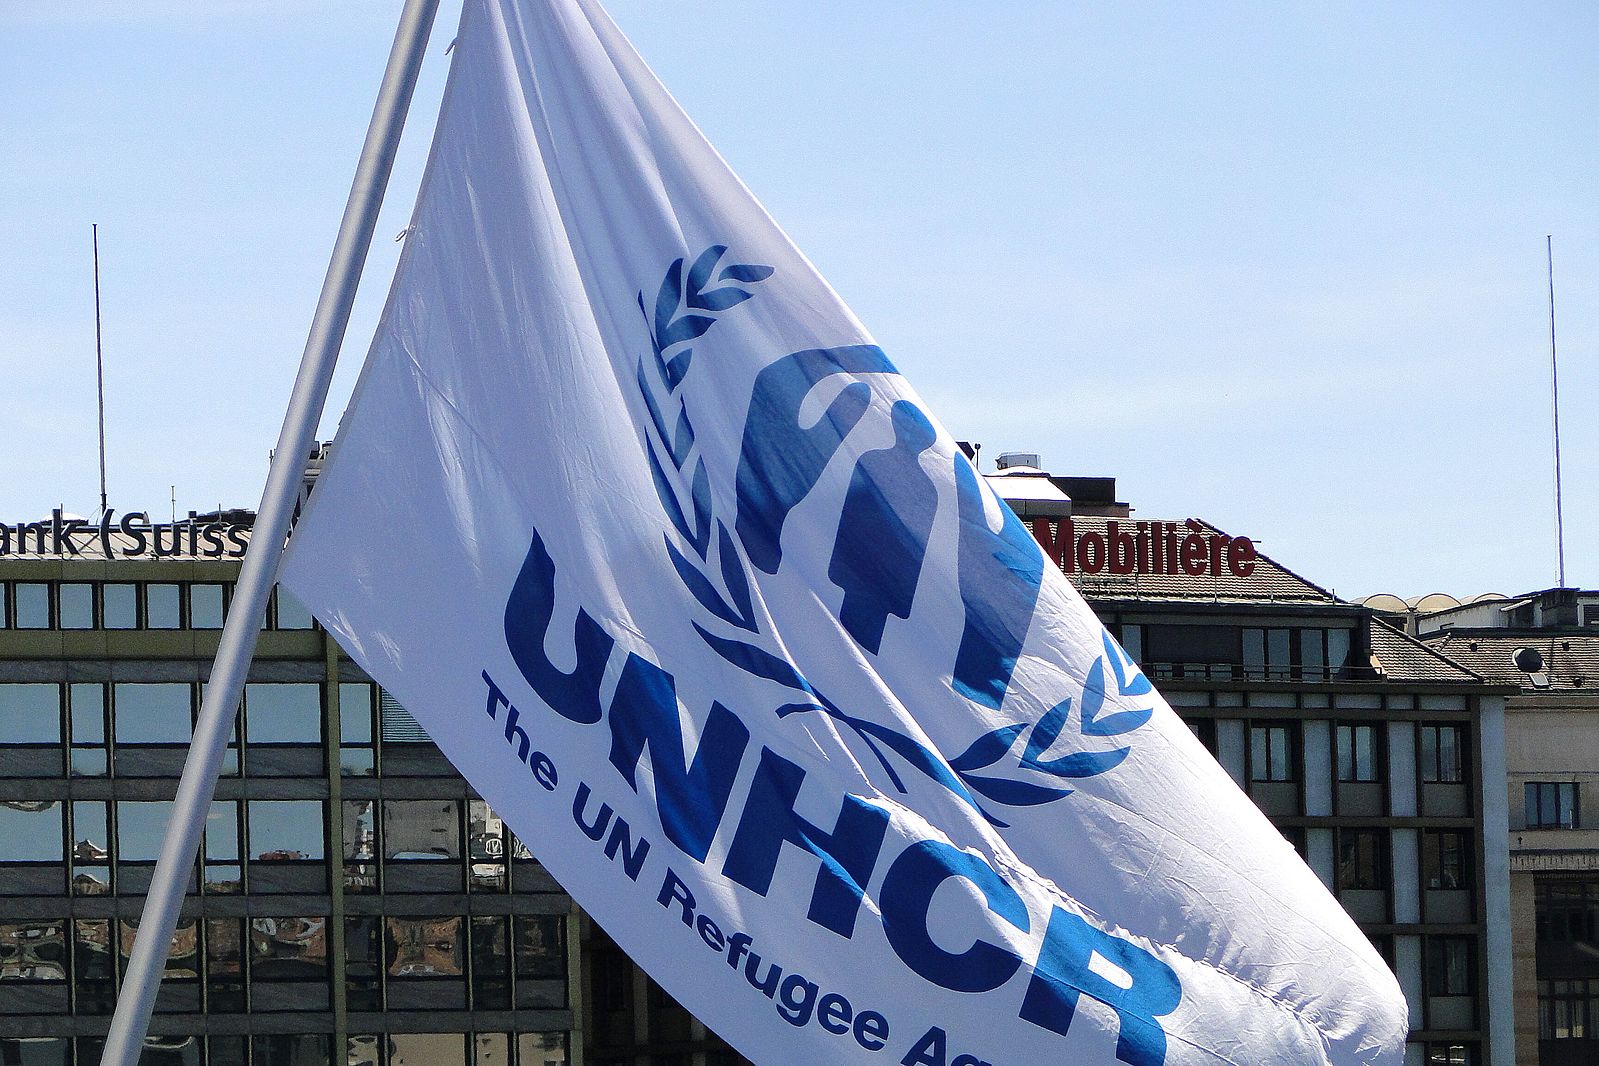 By Adam Jones, Ph.D. “Banner of UN High Commissioner for Refugees - Geneva – Switzerland” https://creativecommons.org/licenses/by-sa/3.0/deed.en